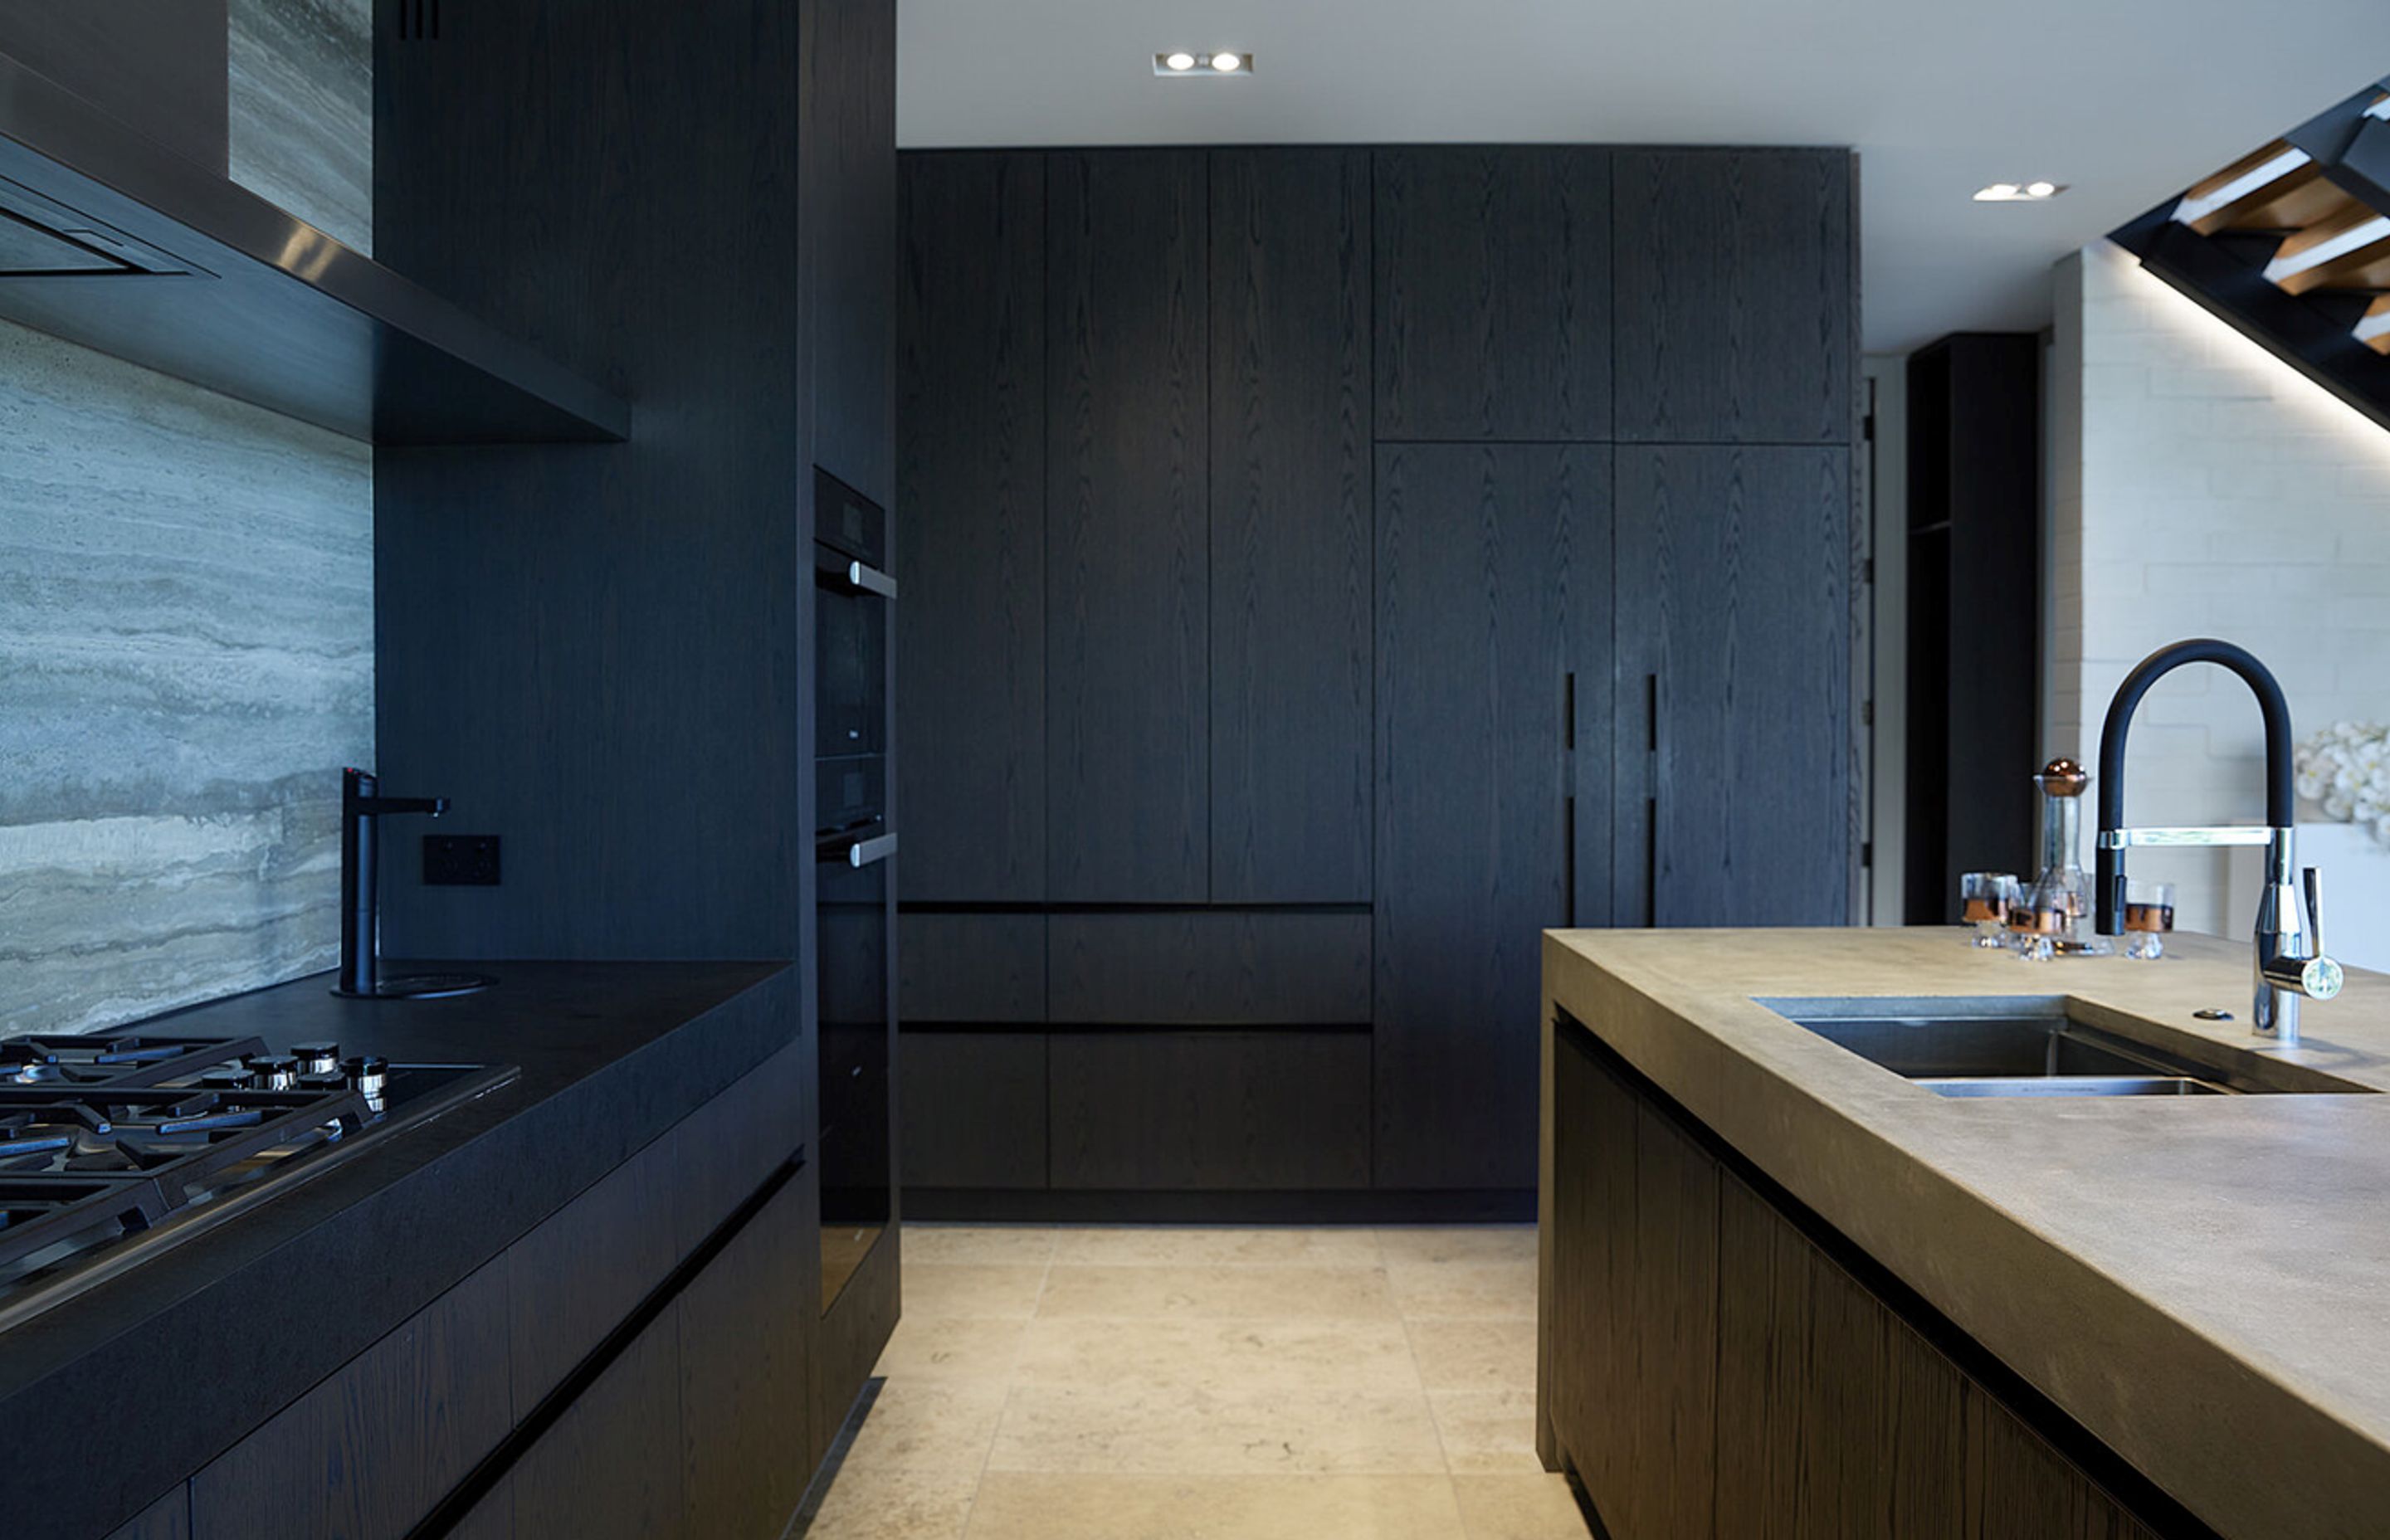 The dark kitchen cabinetry juxtaposes against the sandy-coloured floor and concrete island.